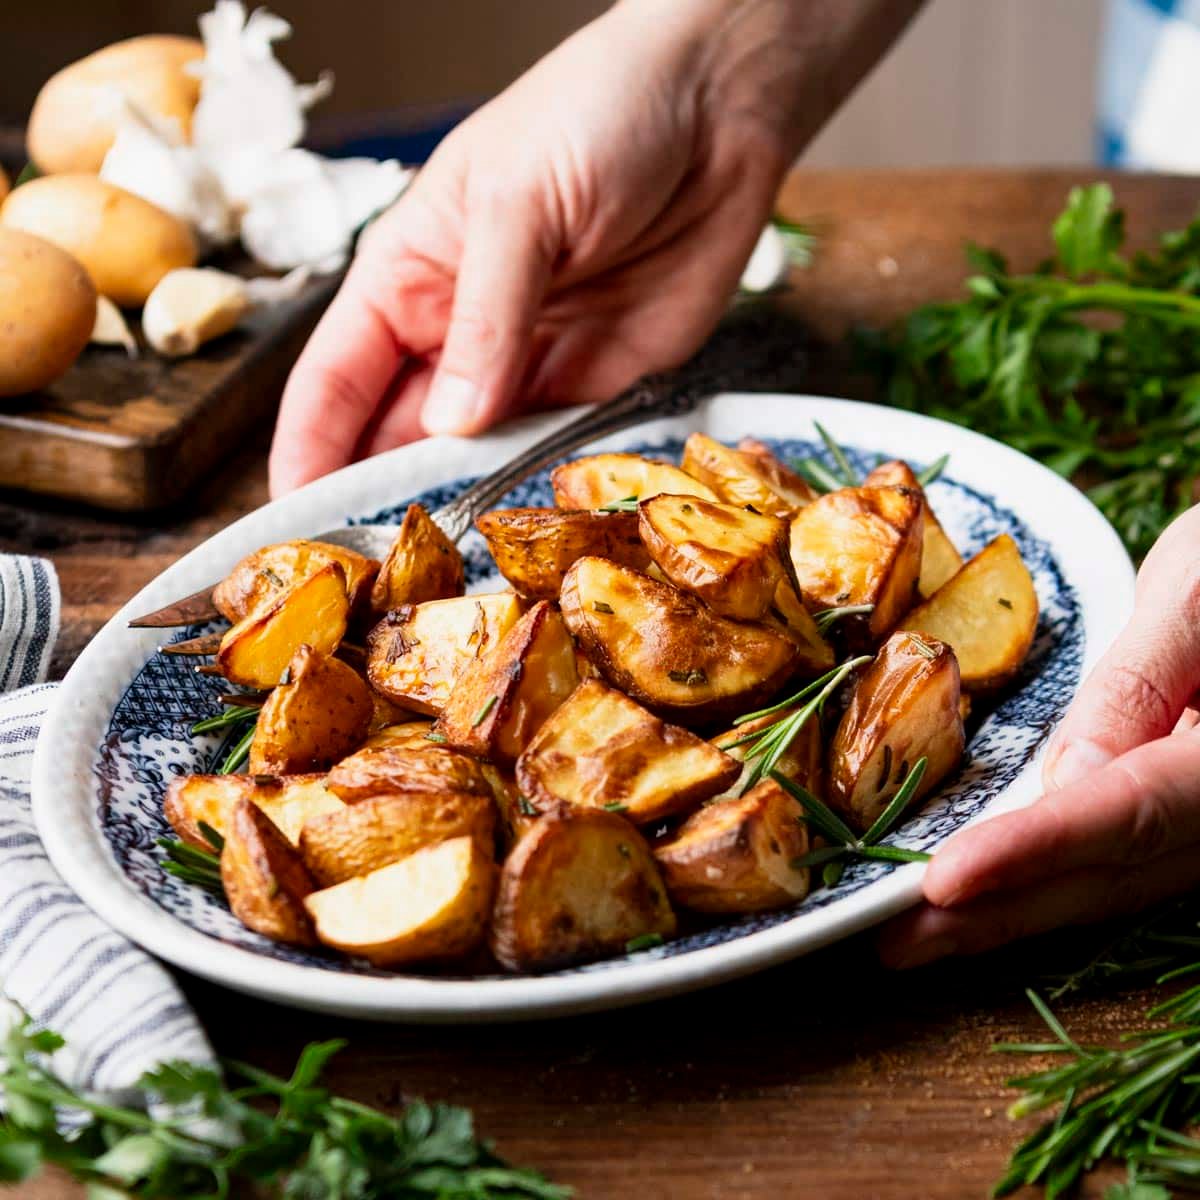 Square side shot of hands serving roasted gold potatoes with rosemary and olive oil.